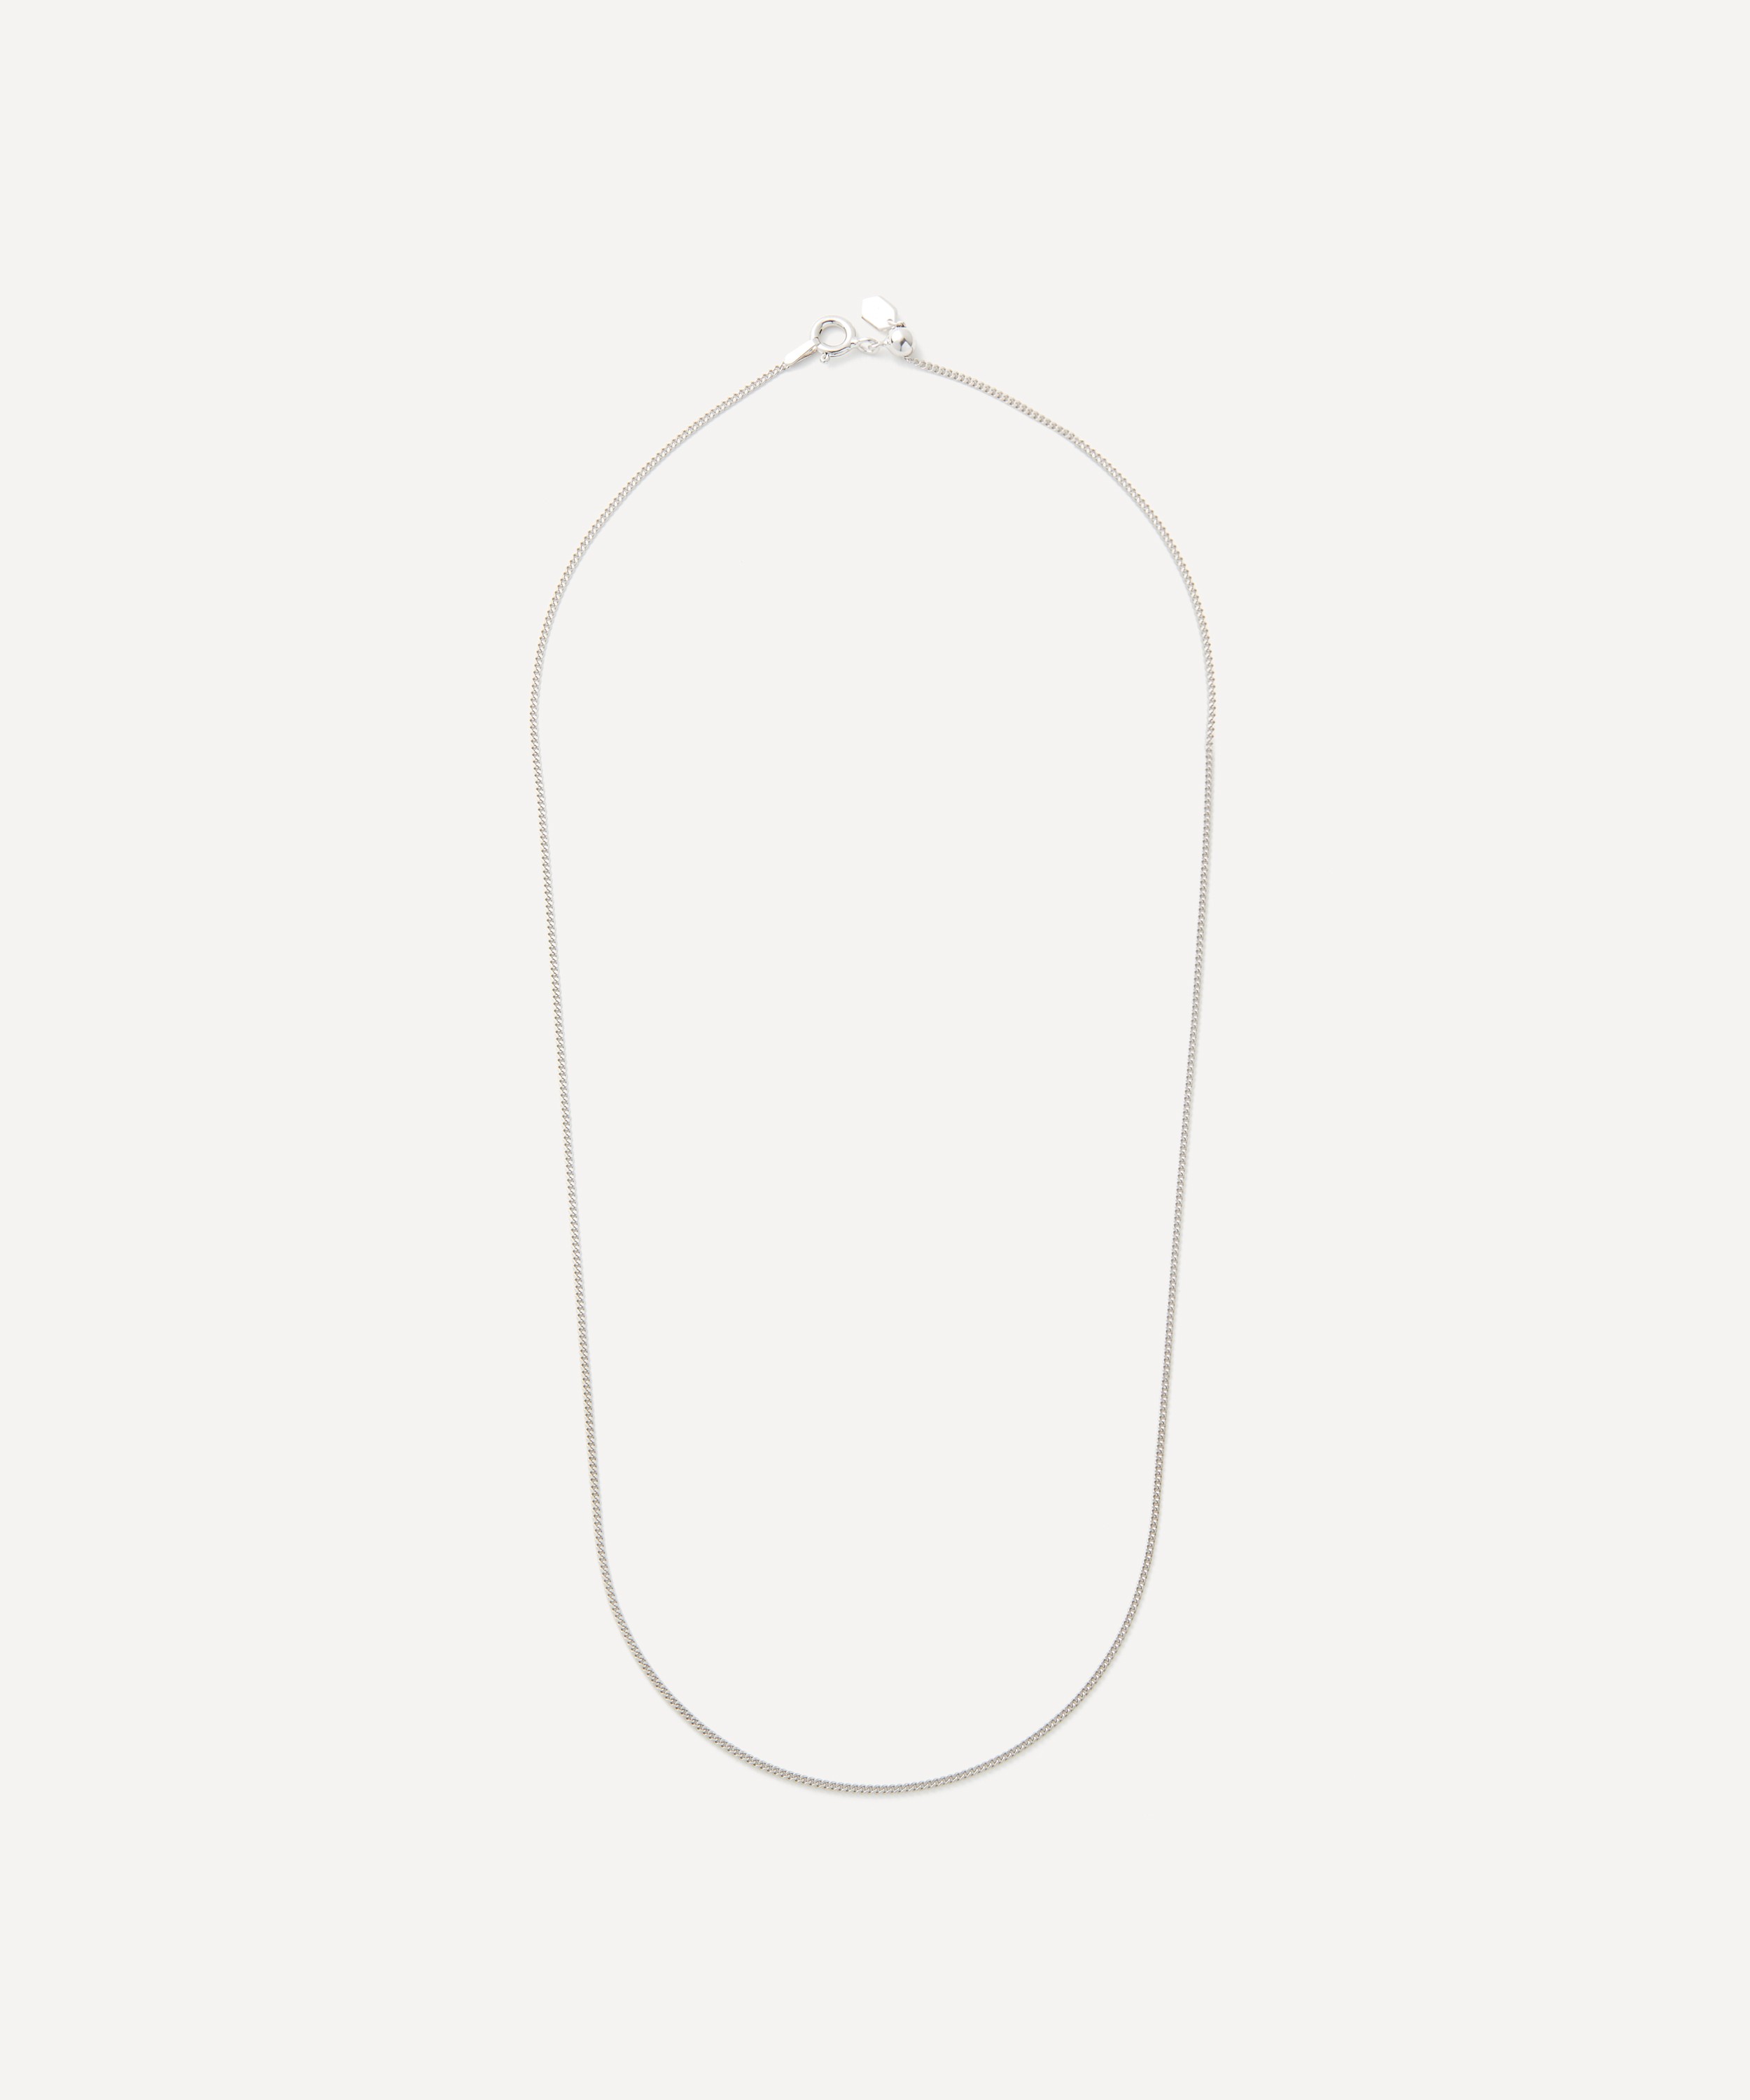 Maria Black - White Rhodium-Plated Nyhavn Chain Necklace image number 0